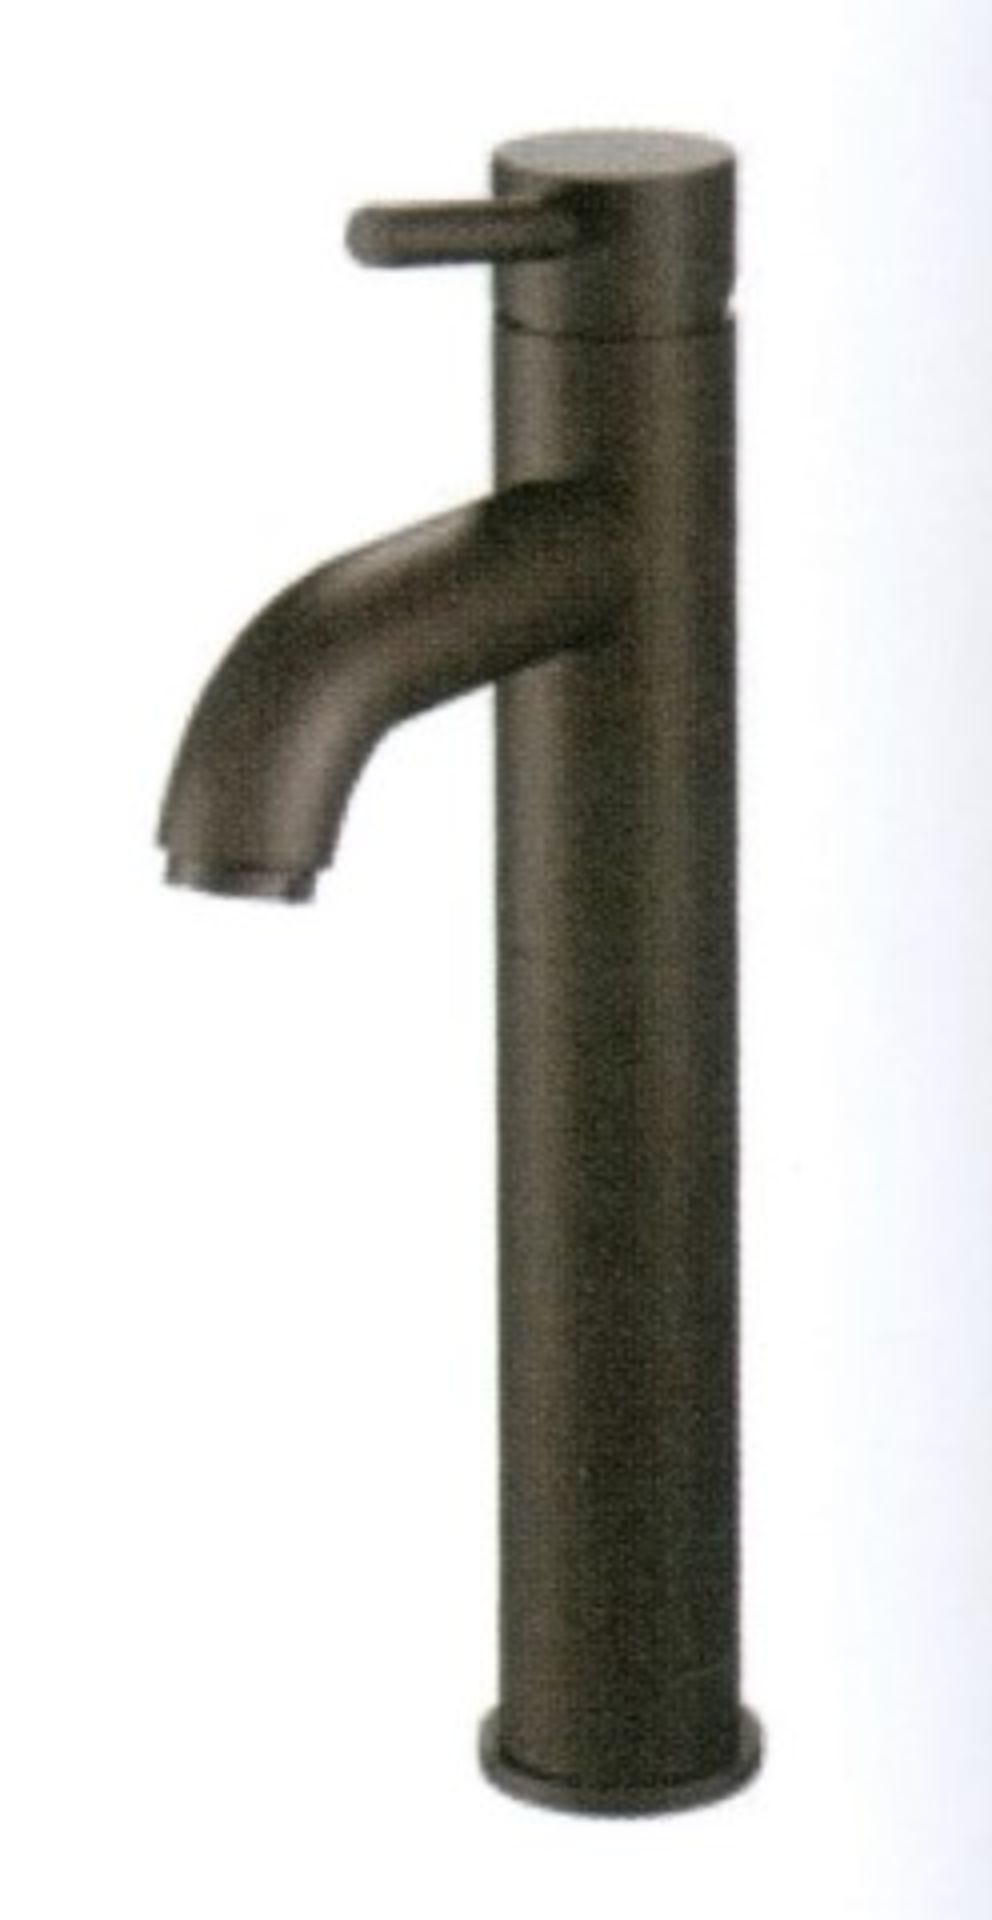 1 x Round Basin Countertop Mixer Tap With A Solid Brass Body Finished In Black - Brand New & Boxed -